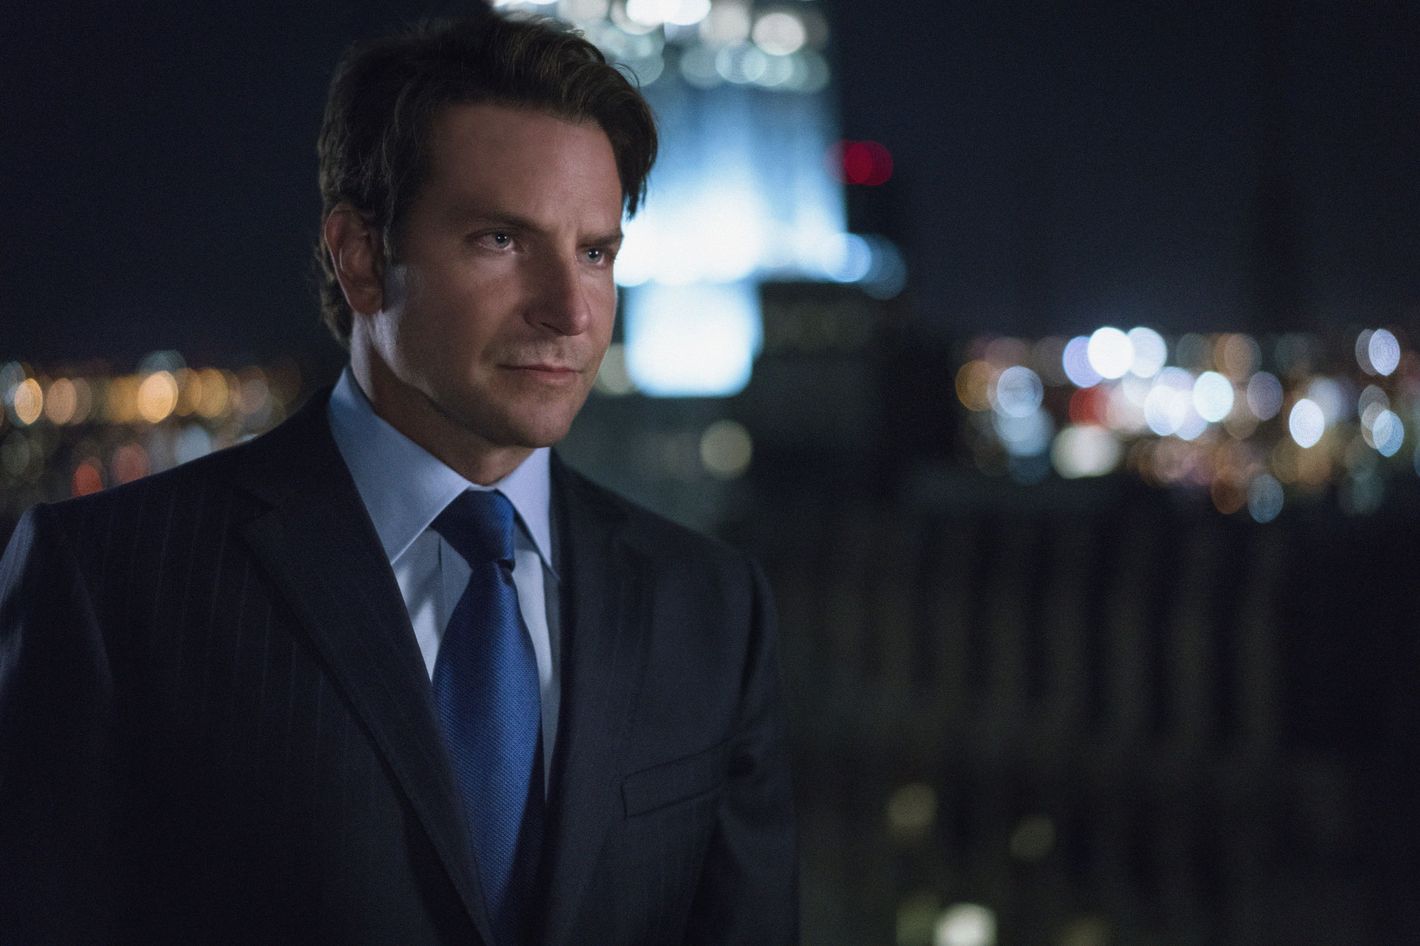 Bradley Cooper Is Going to Be on a CBS Show Based on His Movie Limitless